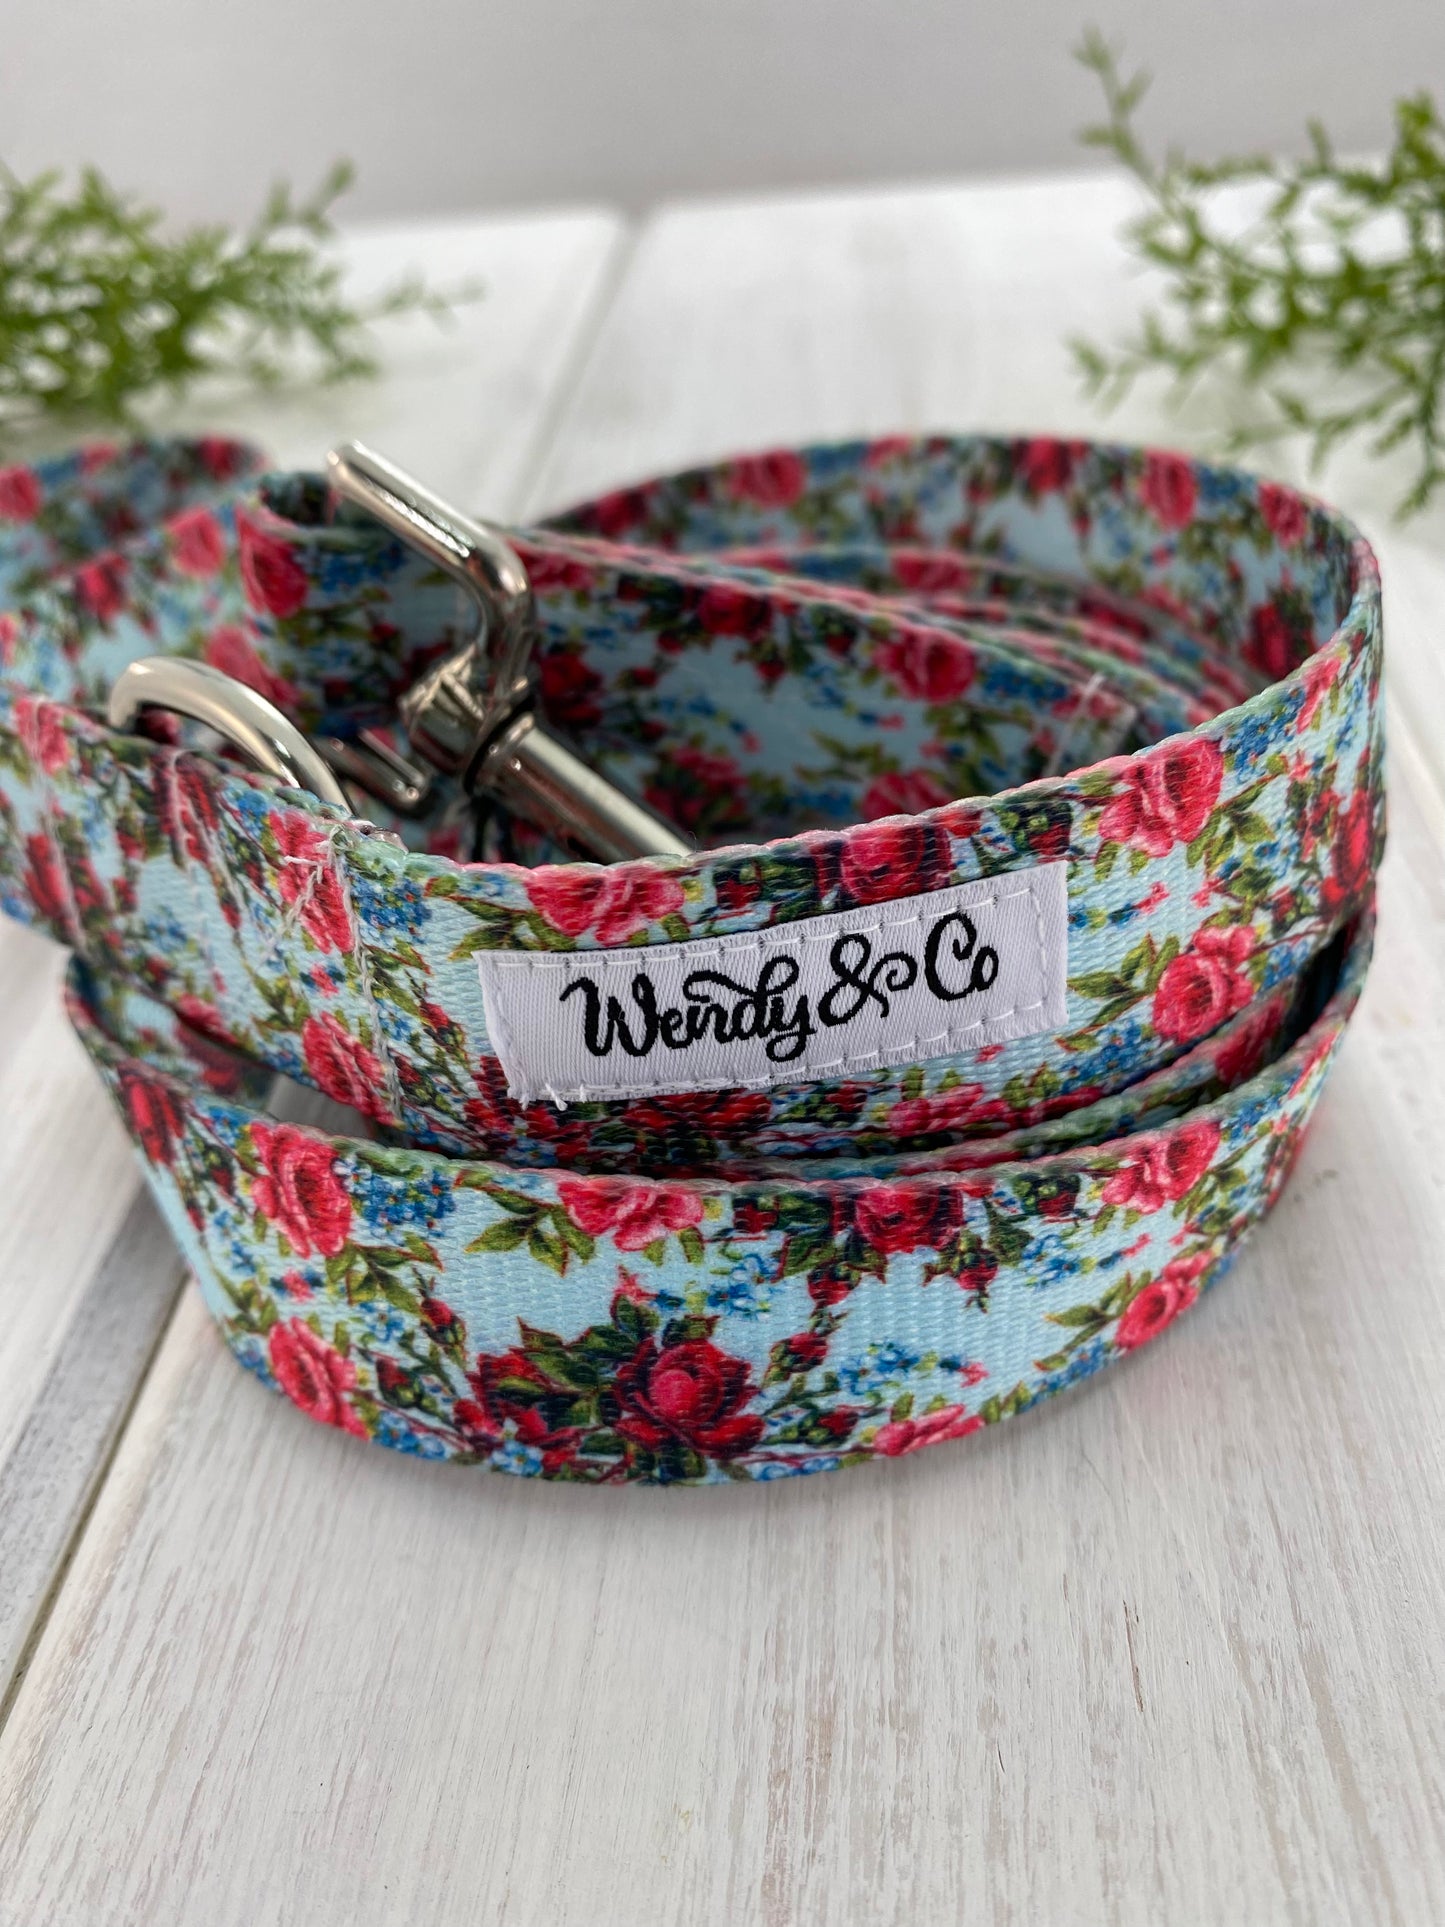 Dog leash in red roses with blue background.